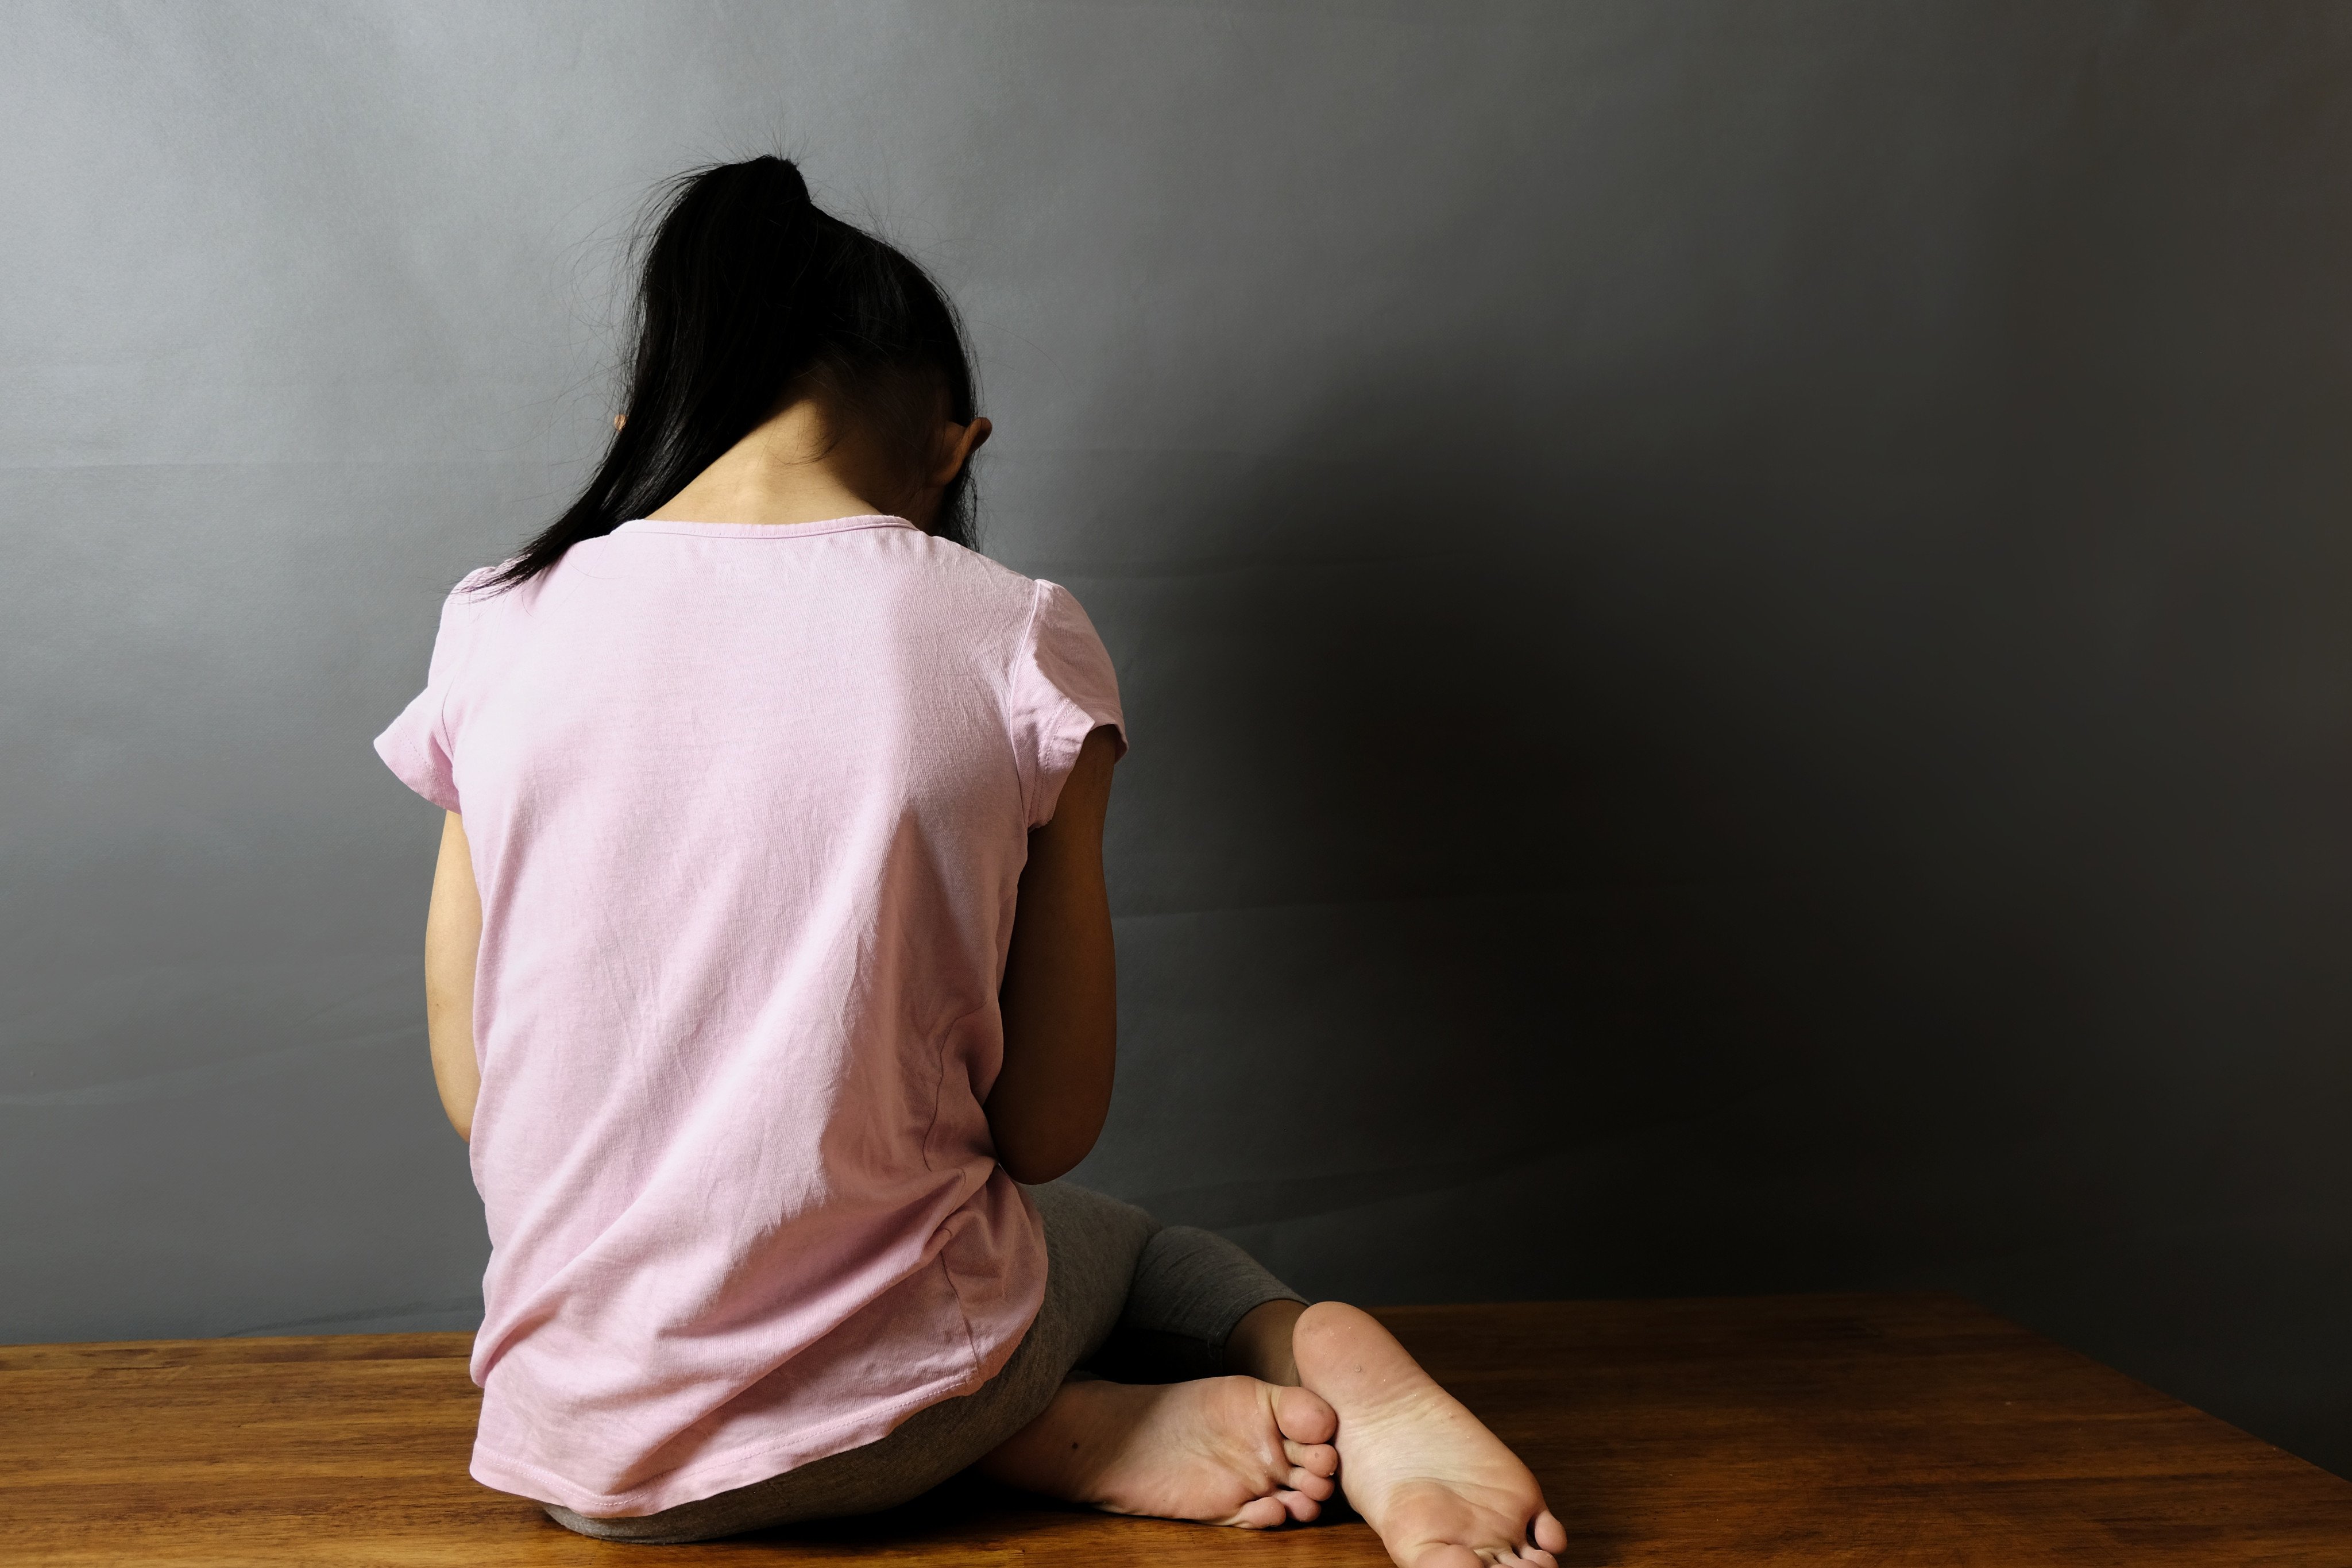 After years of scandals, Hong Kong has passed a law requiring professionals working with children to report serious cases of suspected abuse.  Photo: Shutterstock